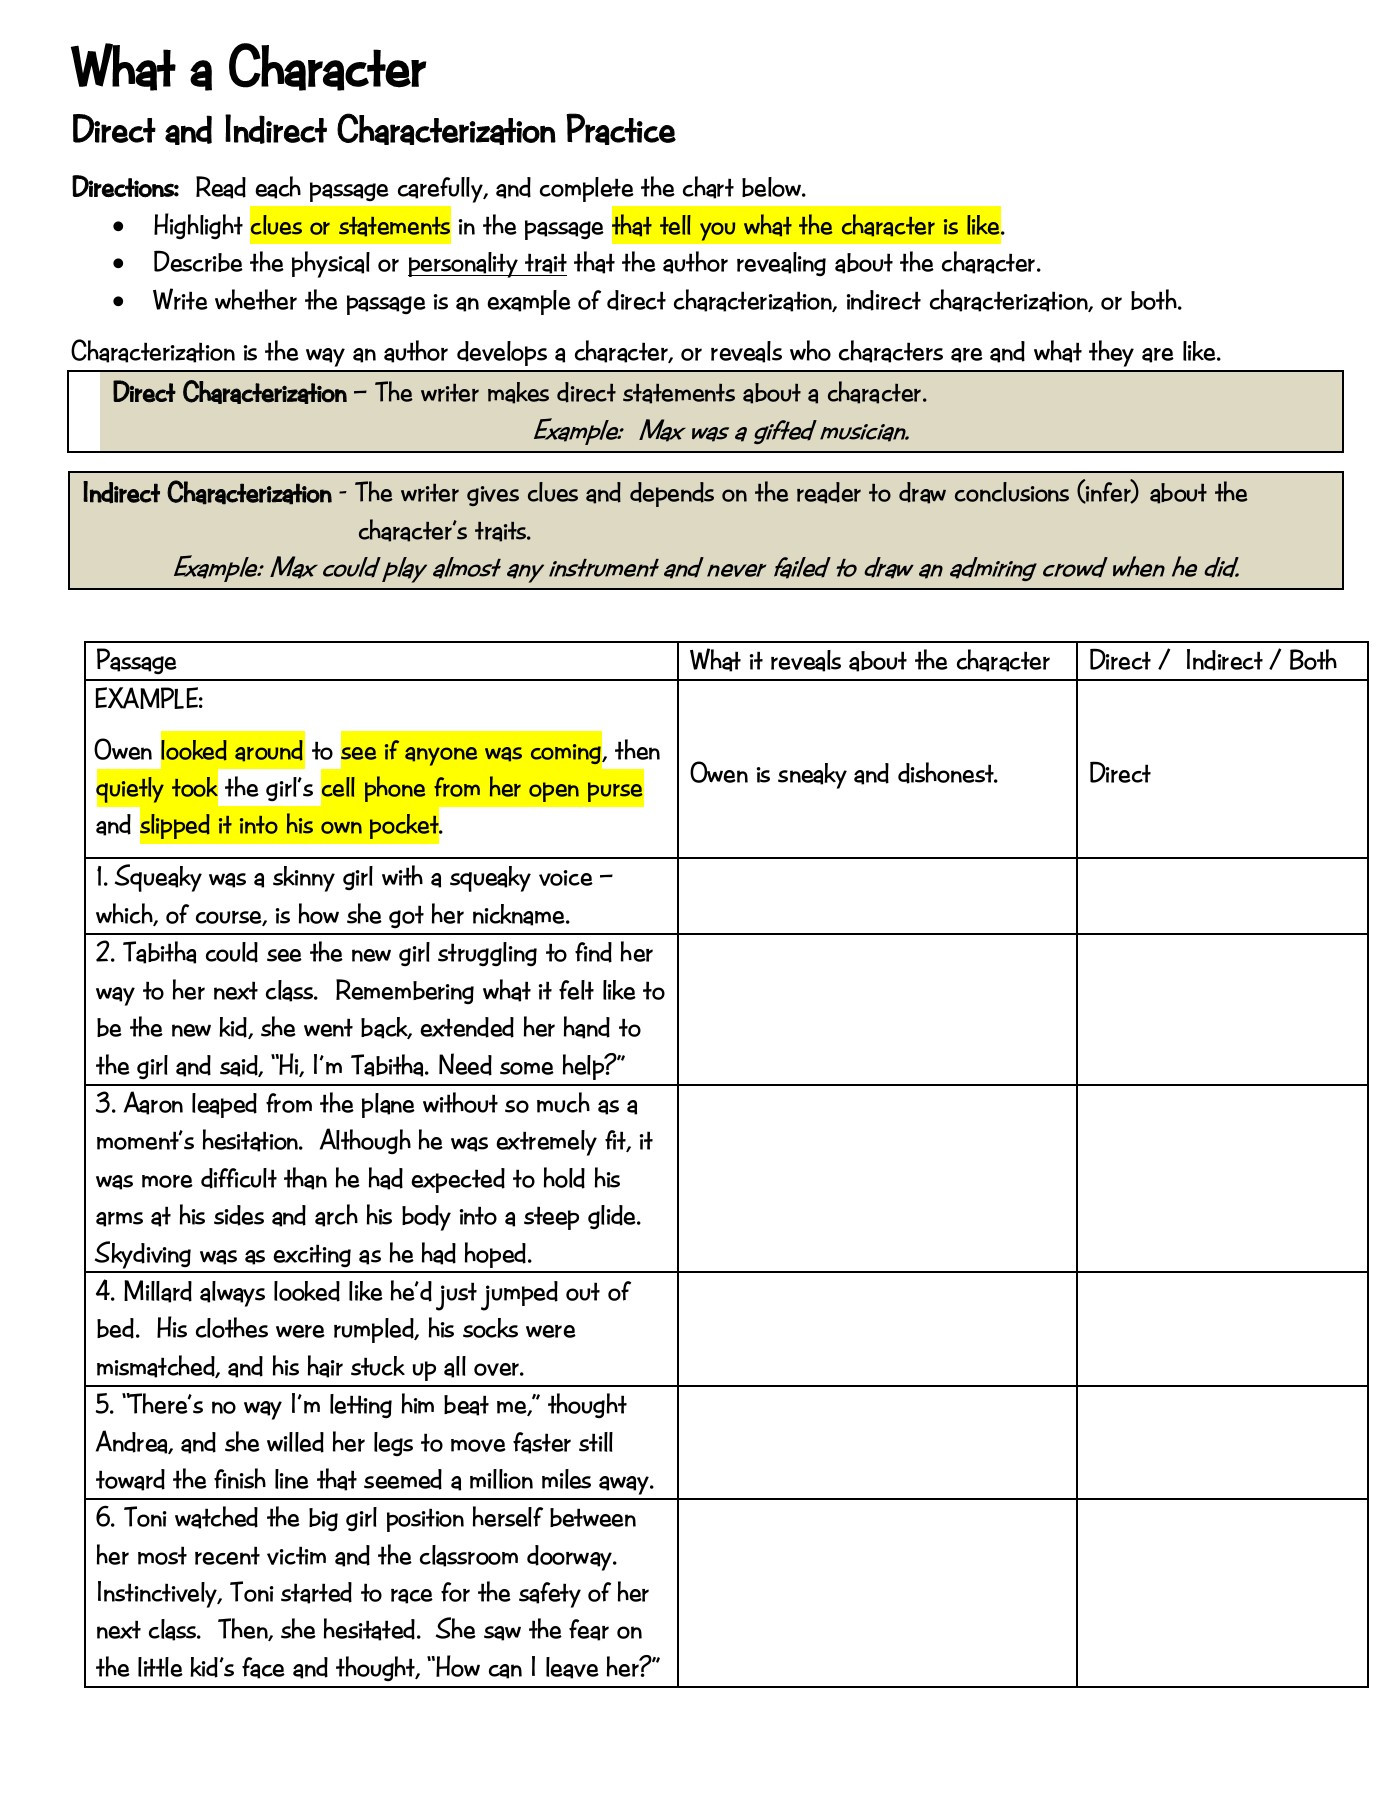 Direct and Indirect Characterization Worksheet Characterization 1 Pages 1 2 Text Version